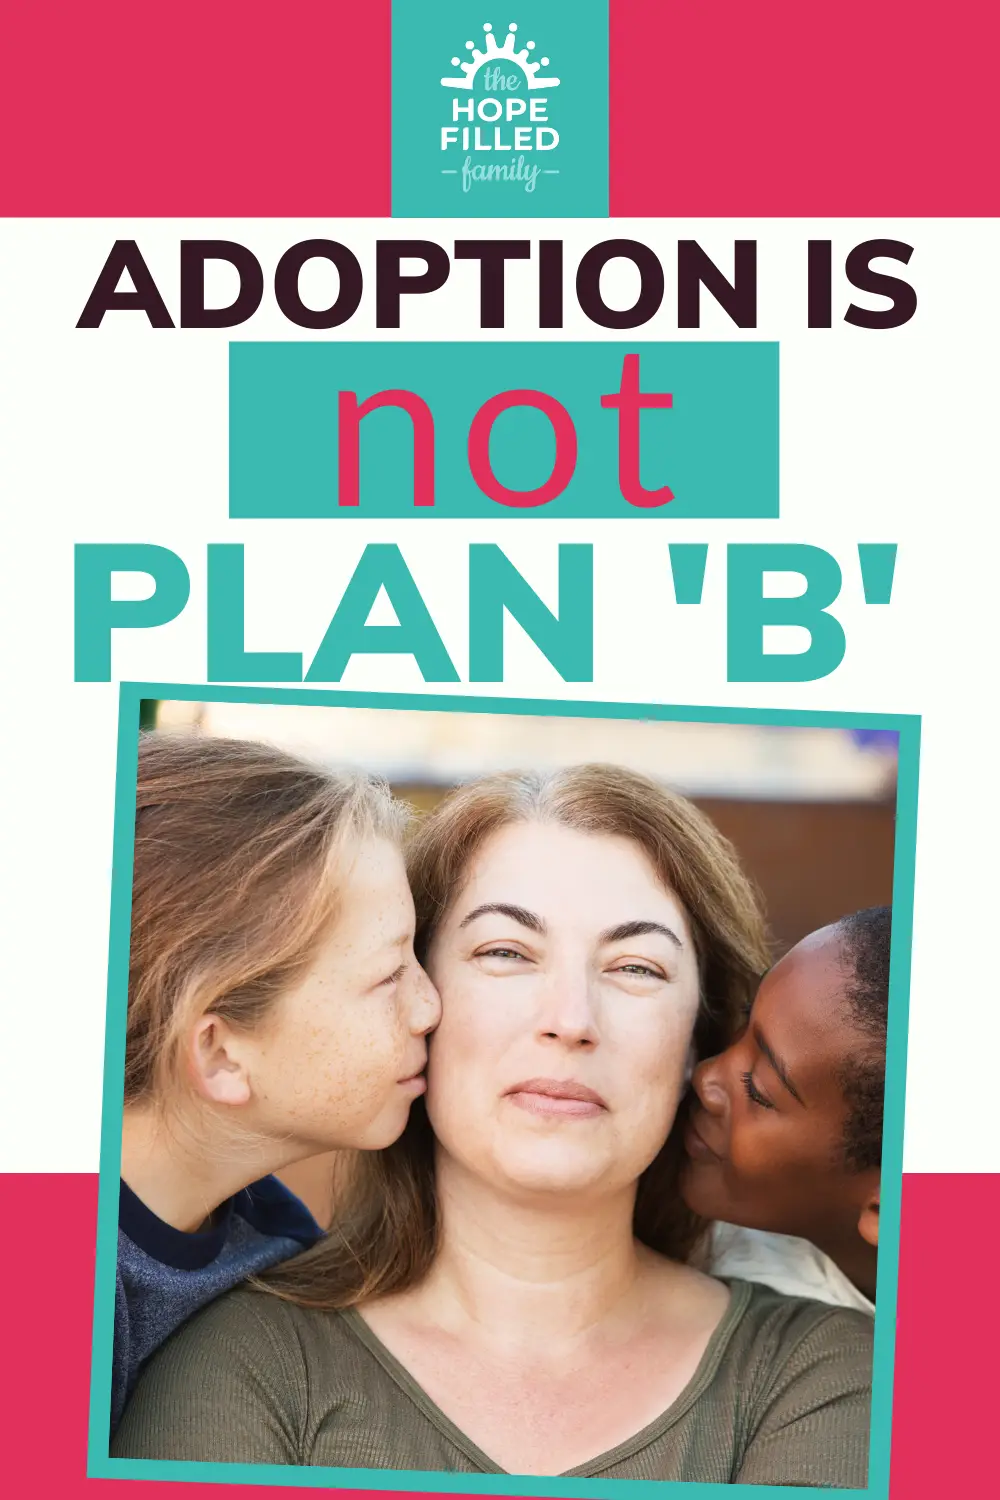 Adoption used to be our 'Plan B' - if we couldn't have kids biologically, we'd adopt. But then God changed our hearts...